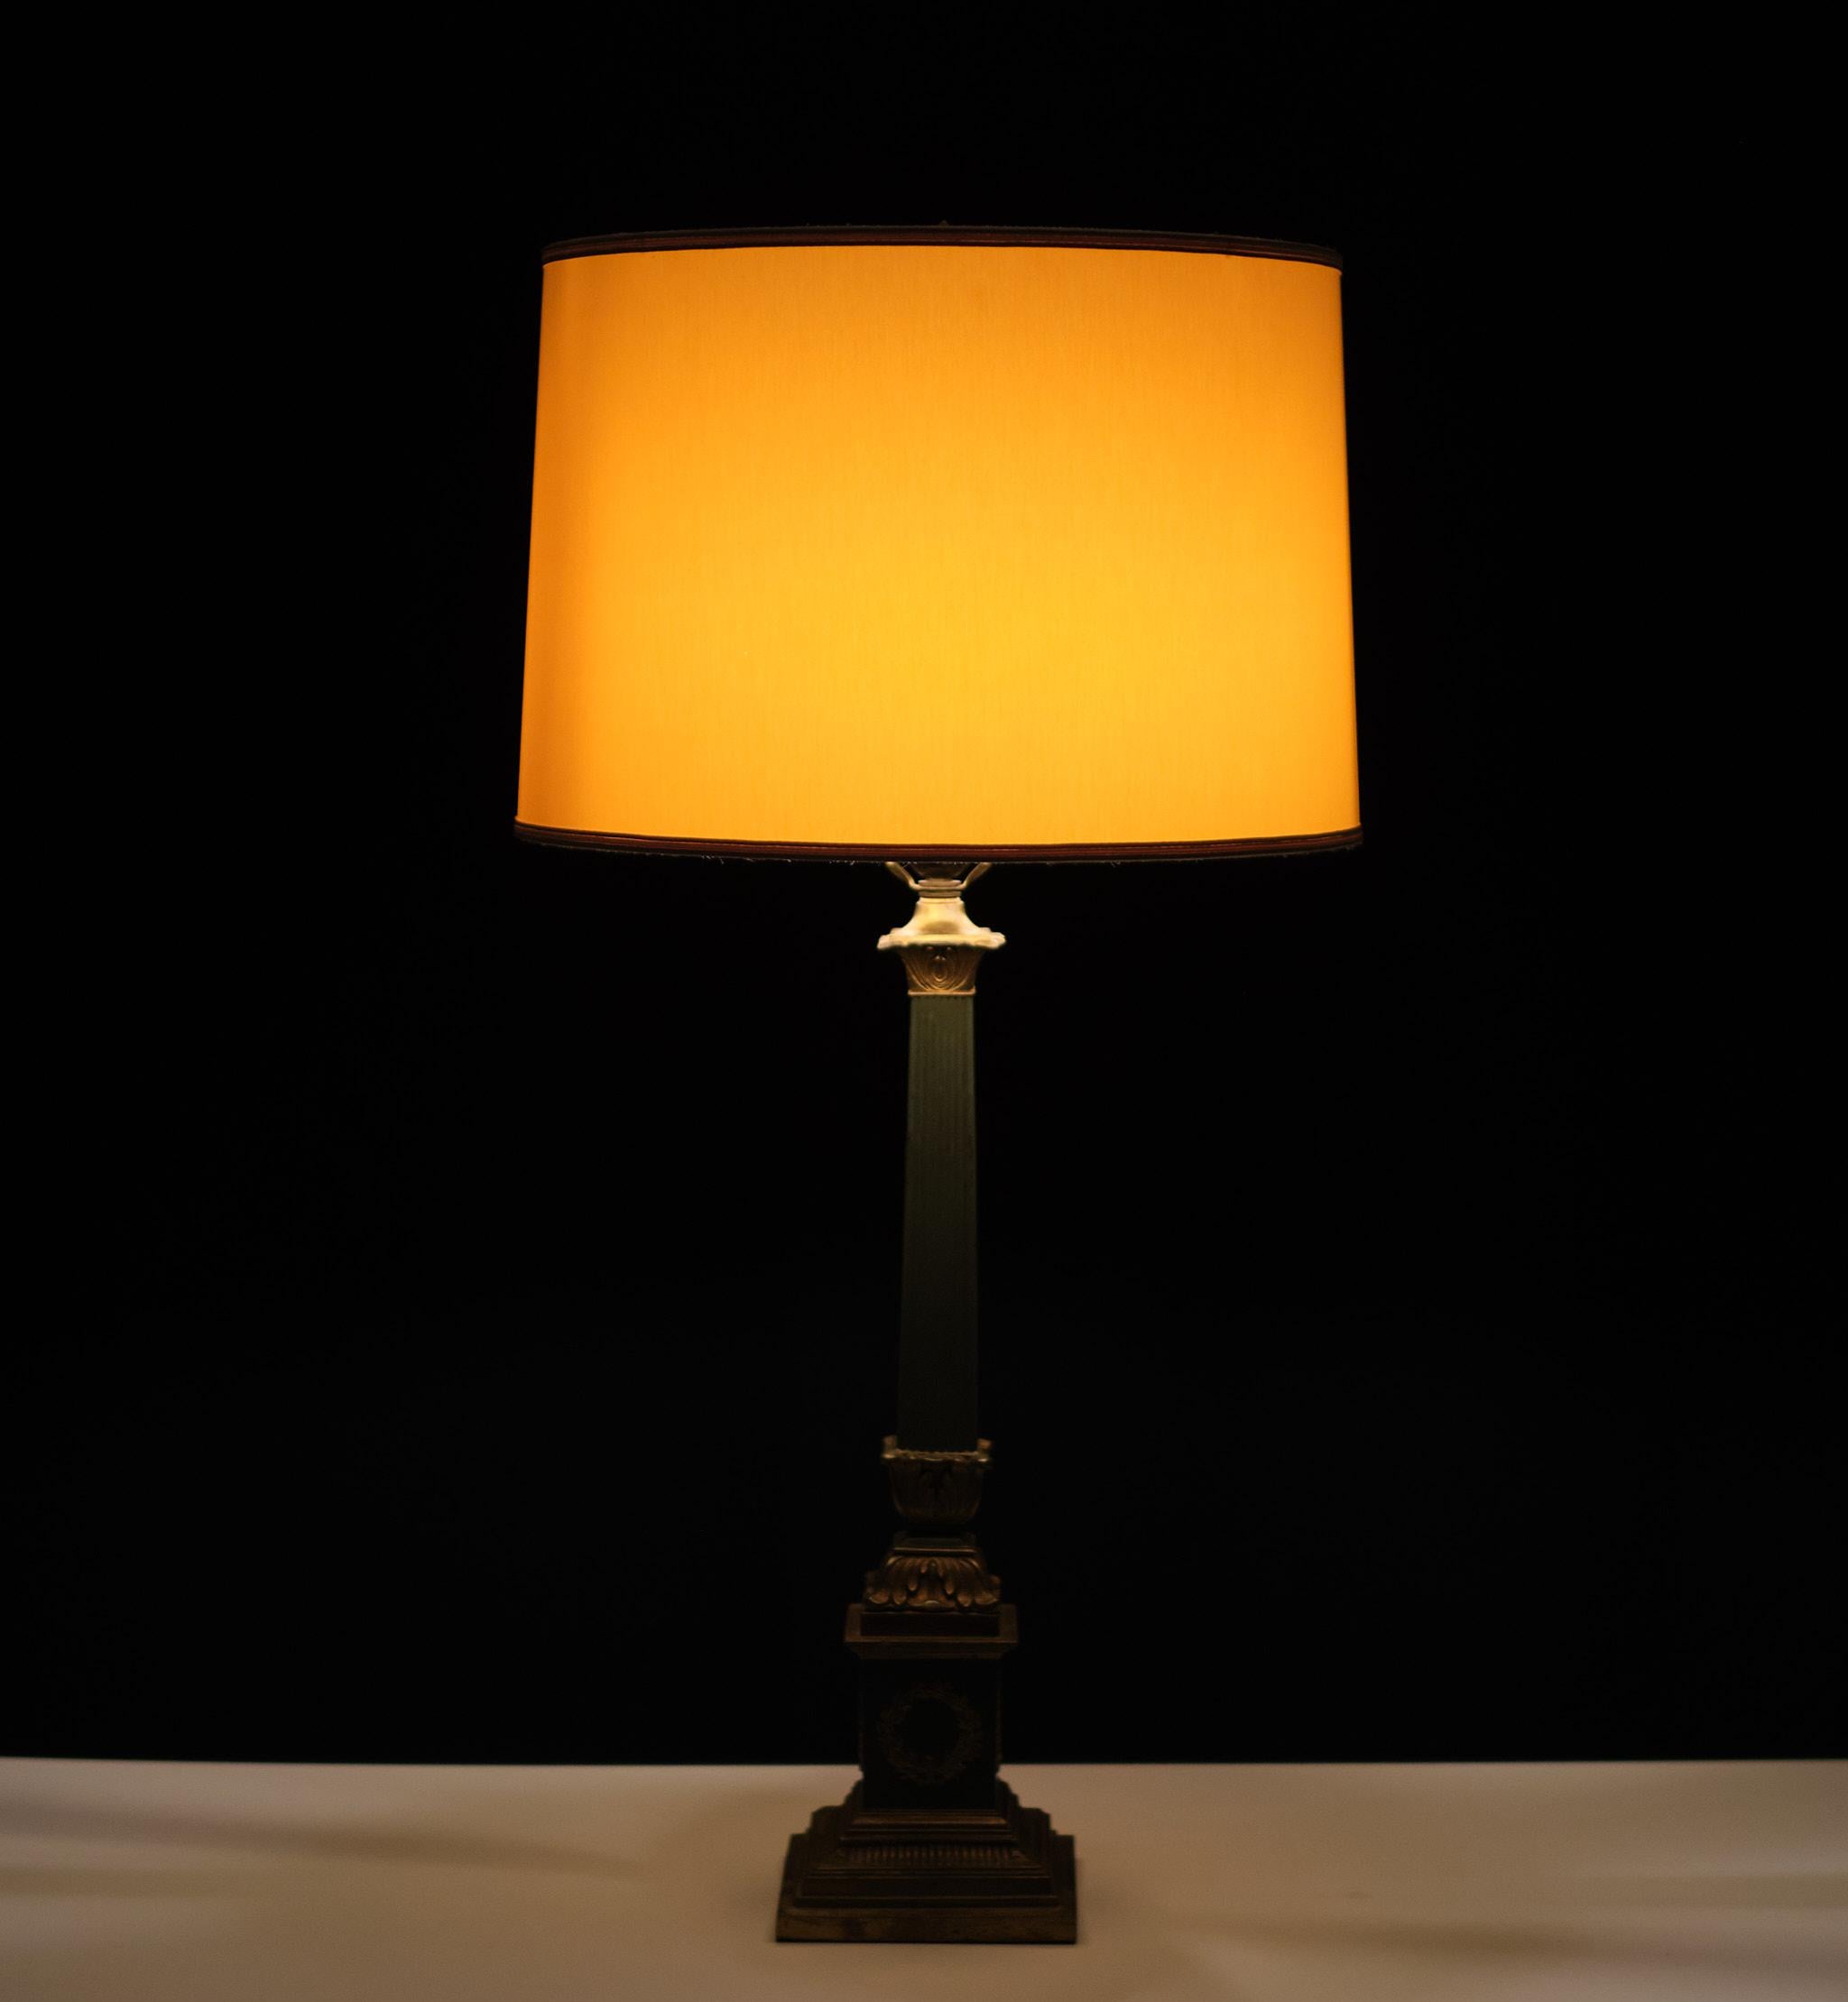 Large Empire Revival Table Lamp  1960s England  For Sale 4